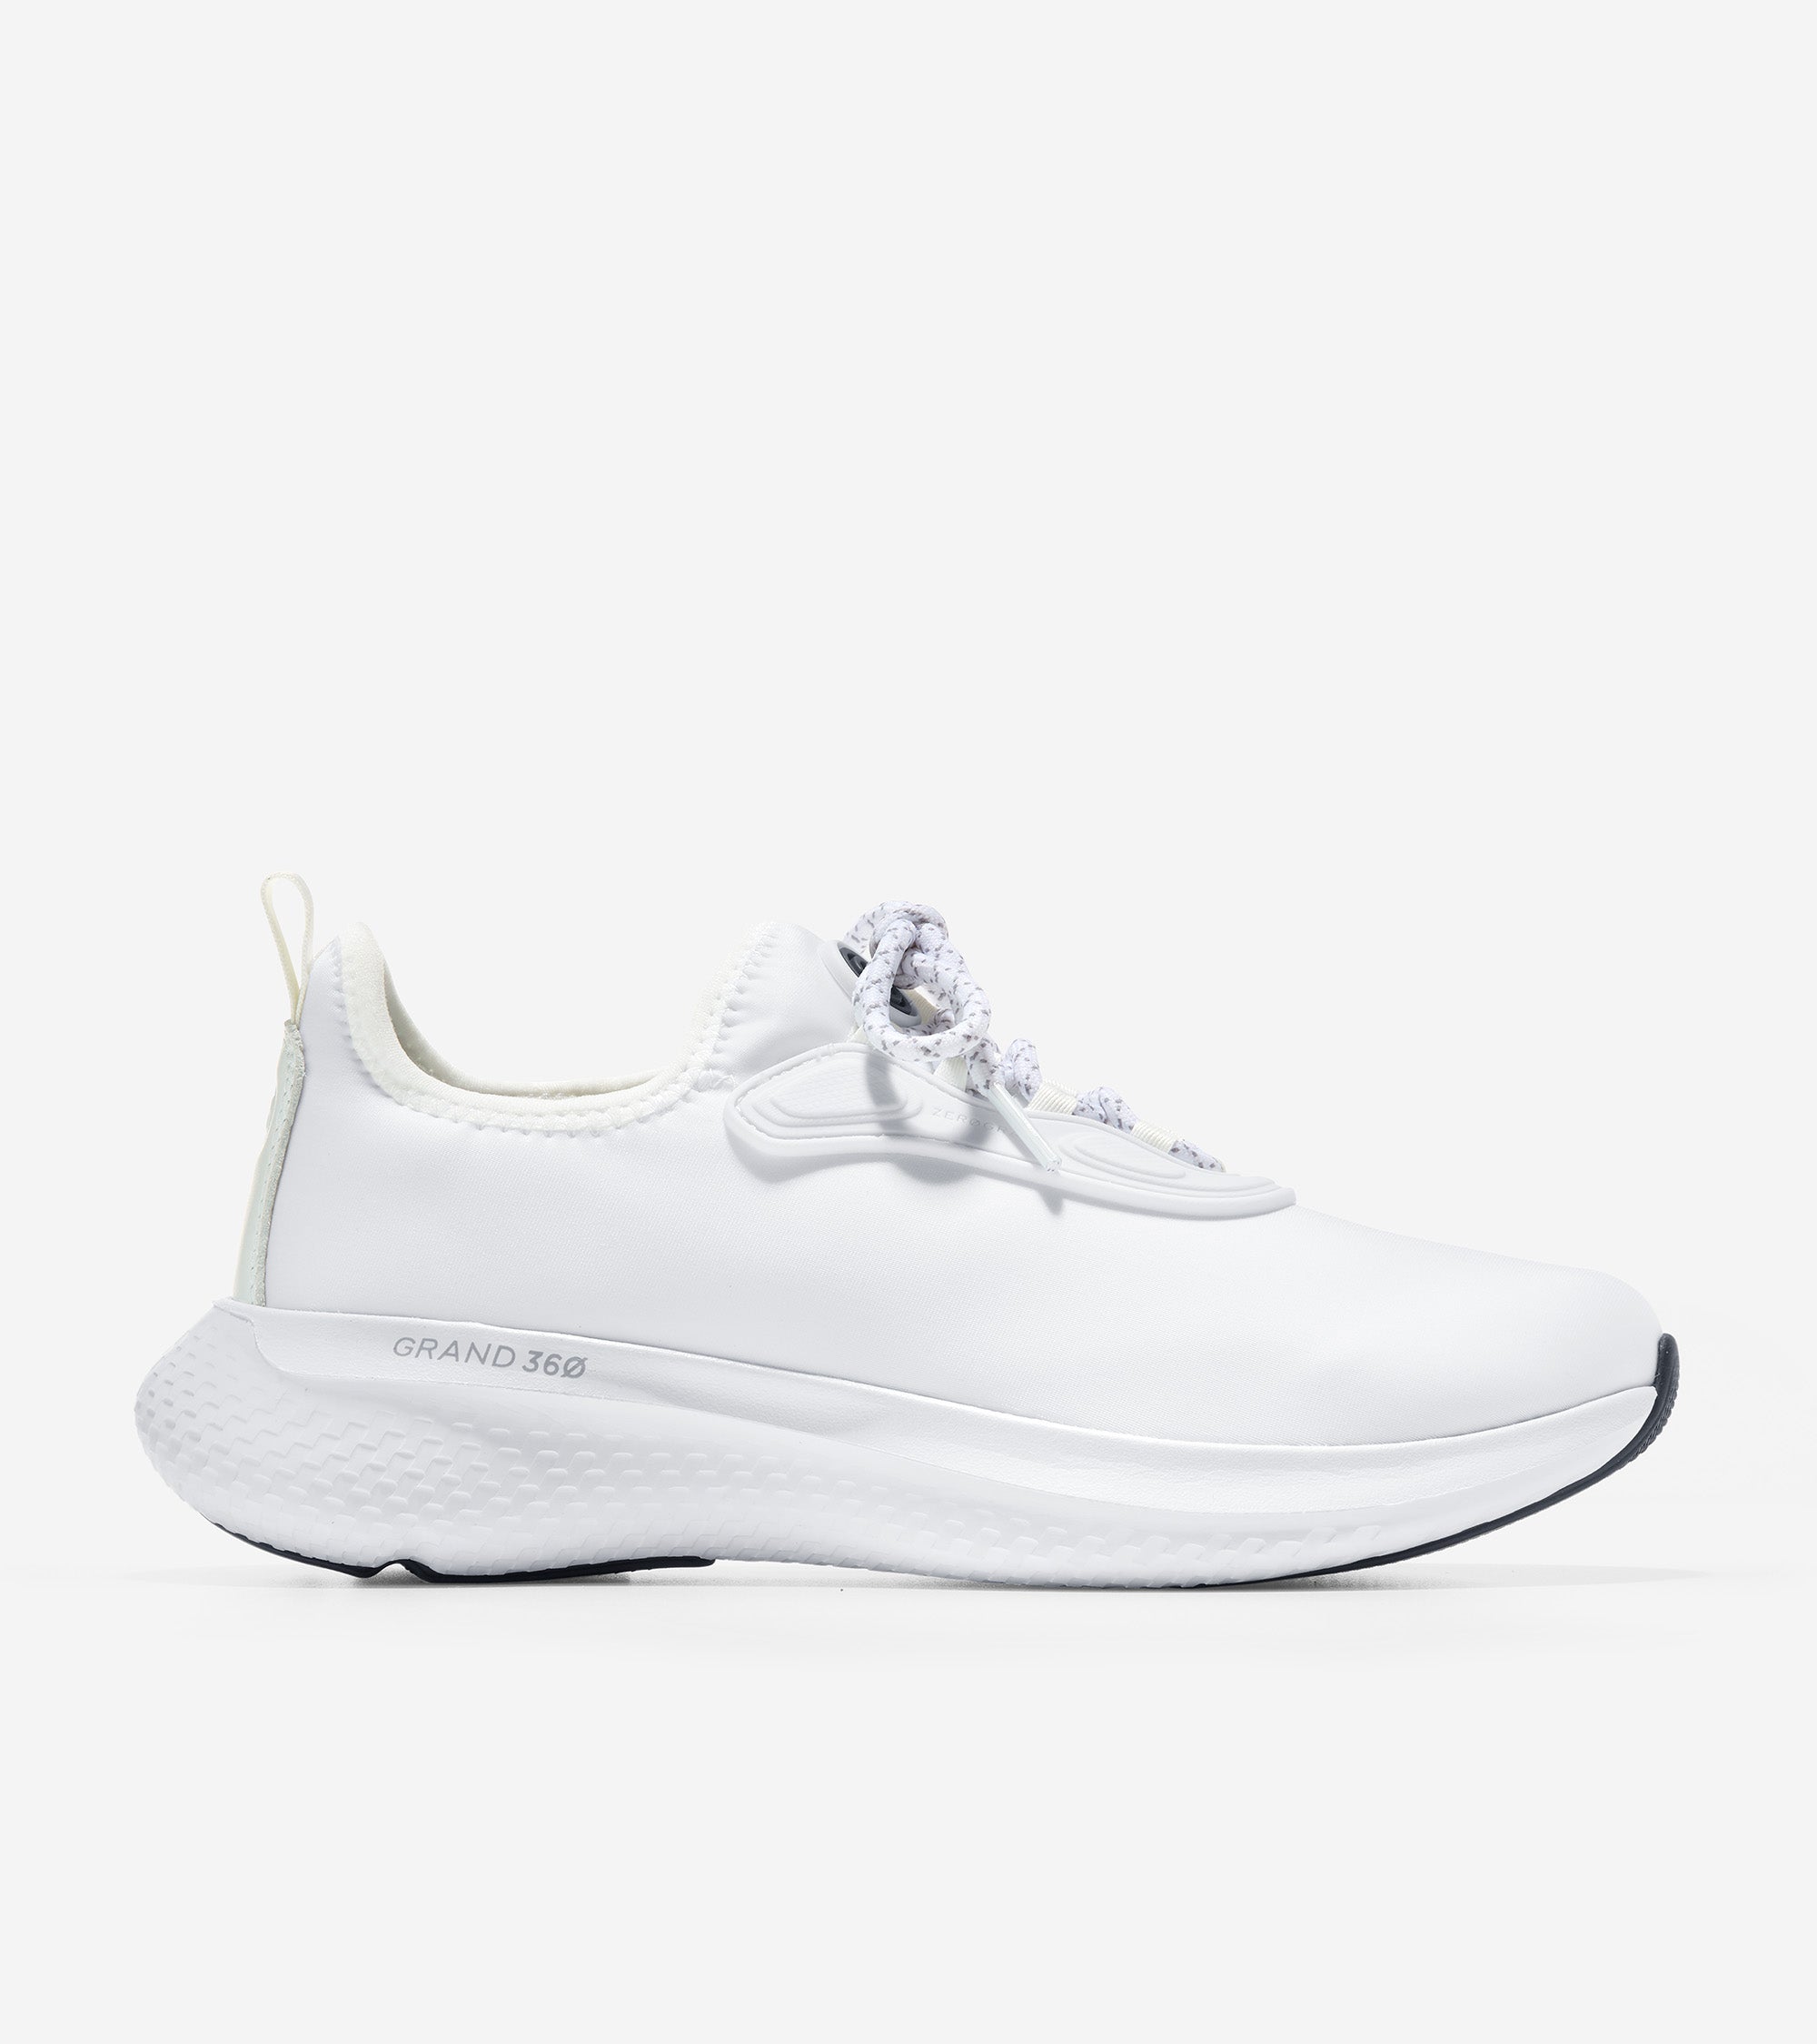 ZERØGRAND Changepace Lace-Up Sneaker - Cole Haan Singapore